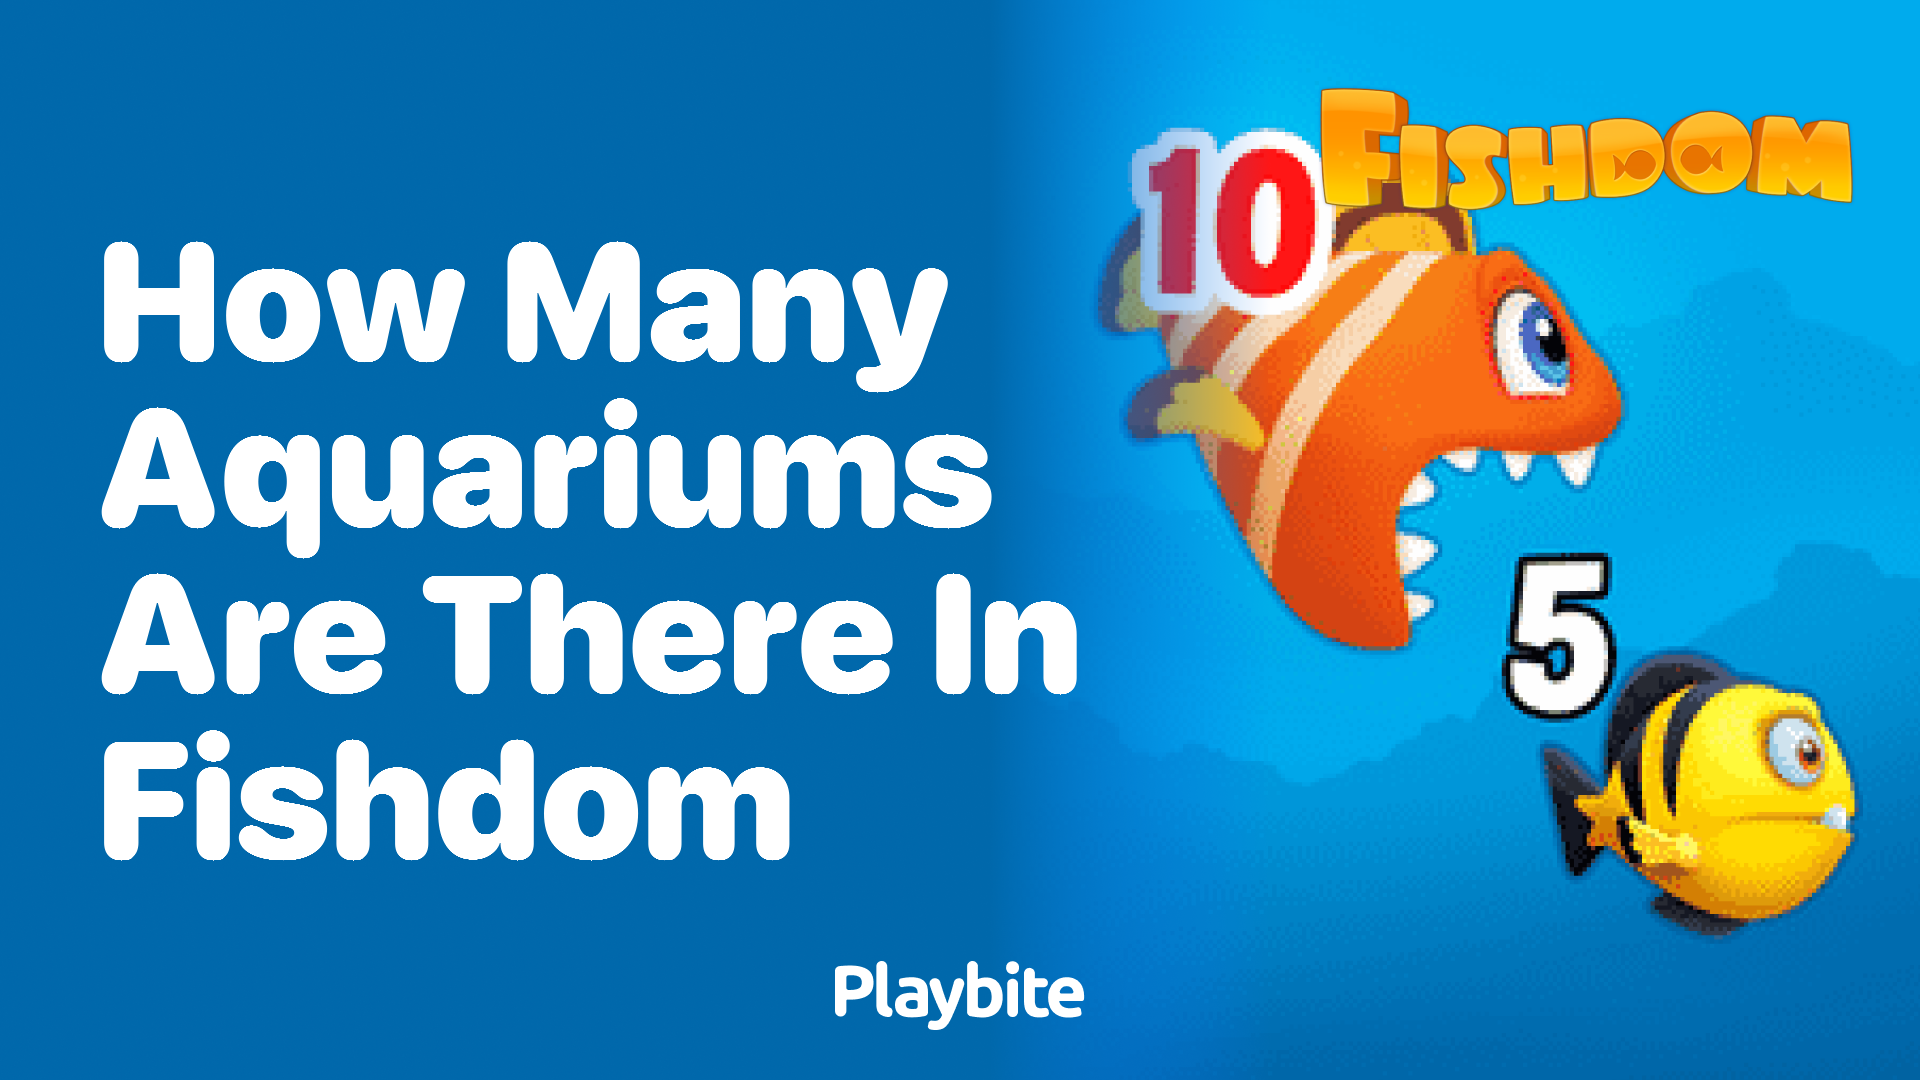 How Many Aquariums Are There in Fishdom?